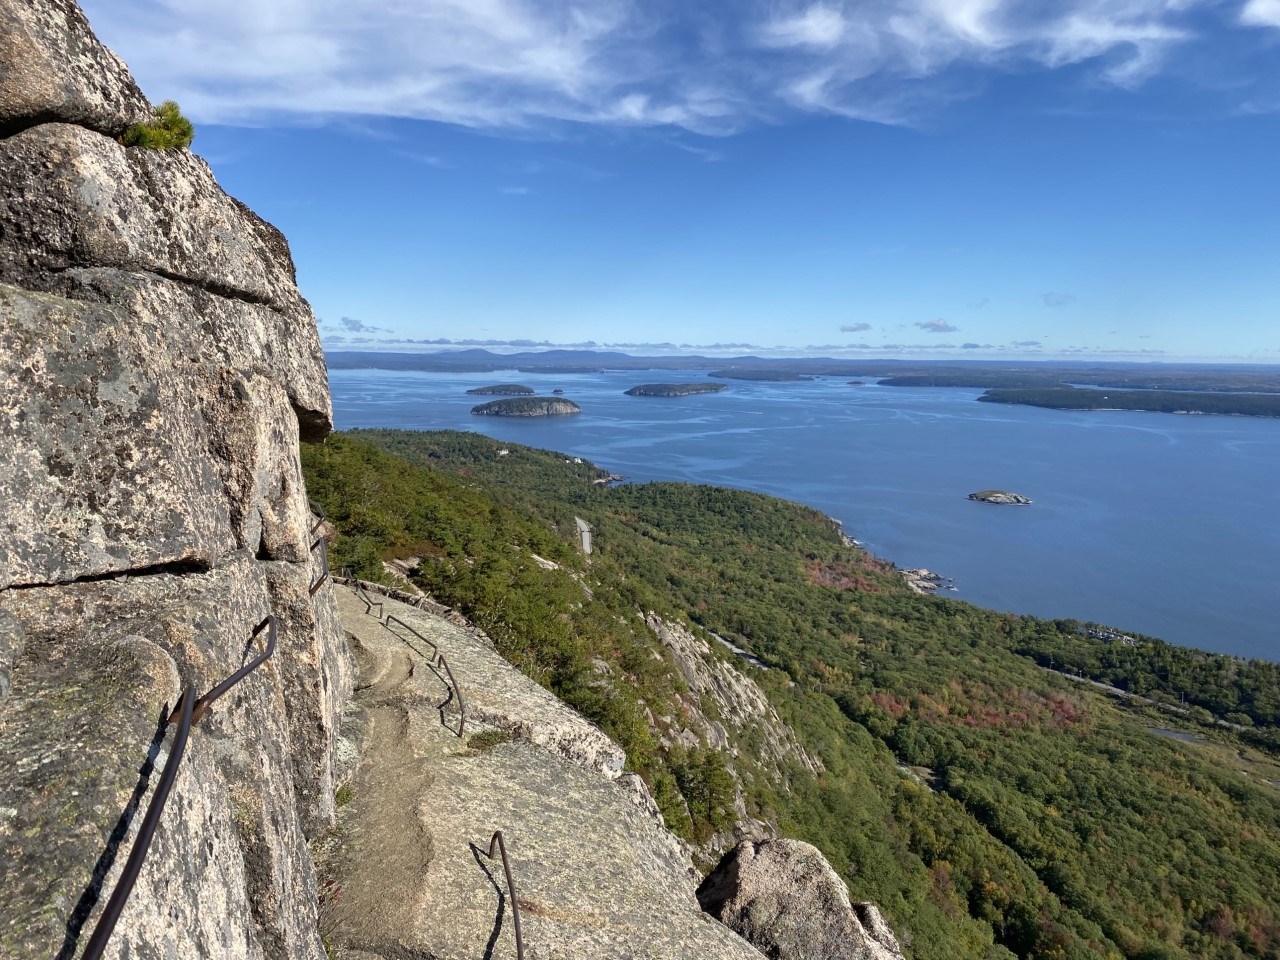 granite cliffs with iron rungs high up above an ocean and forested view